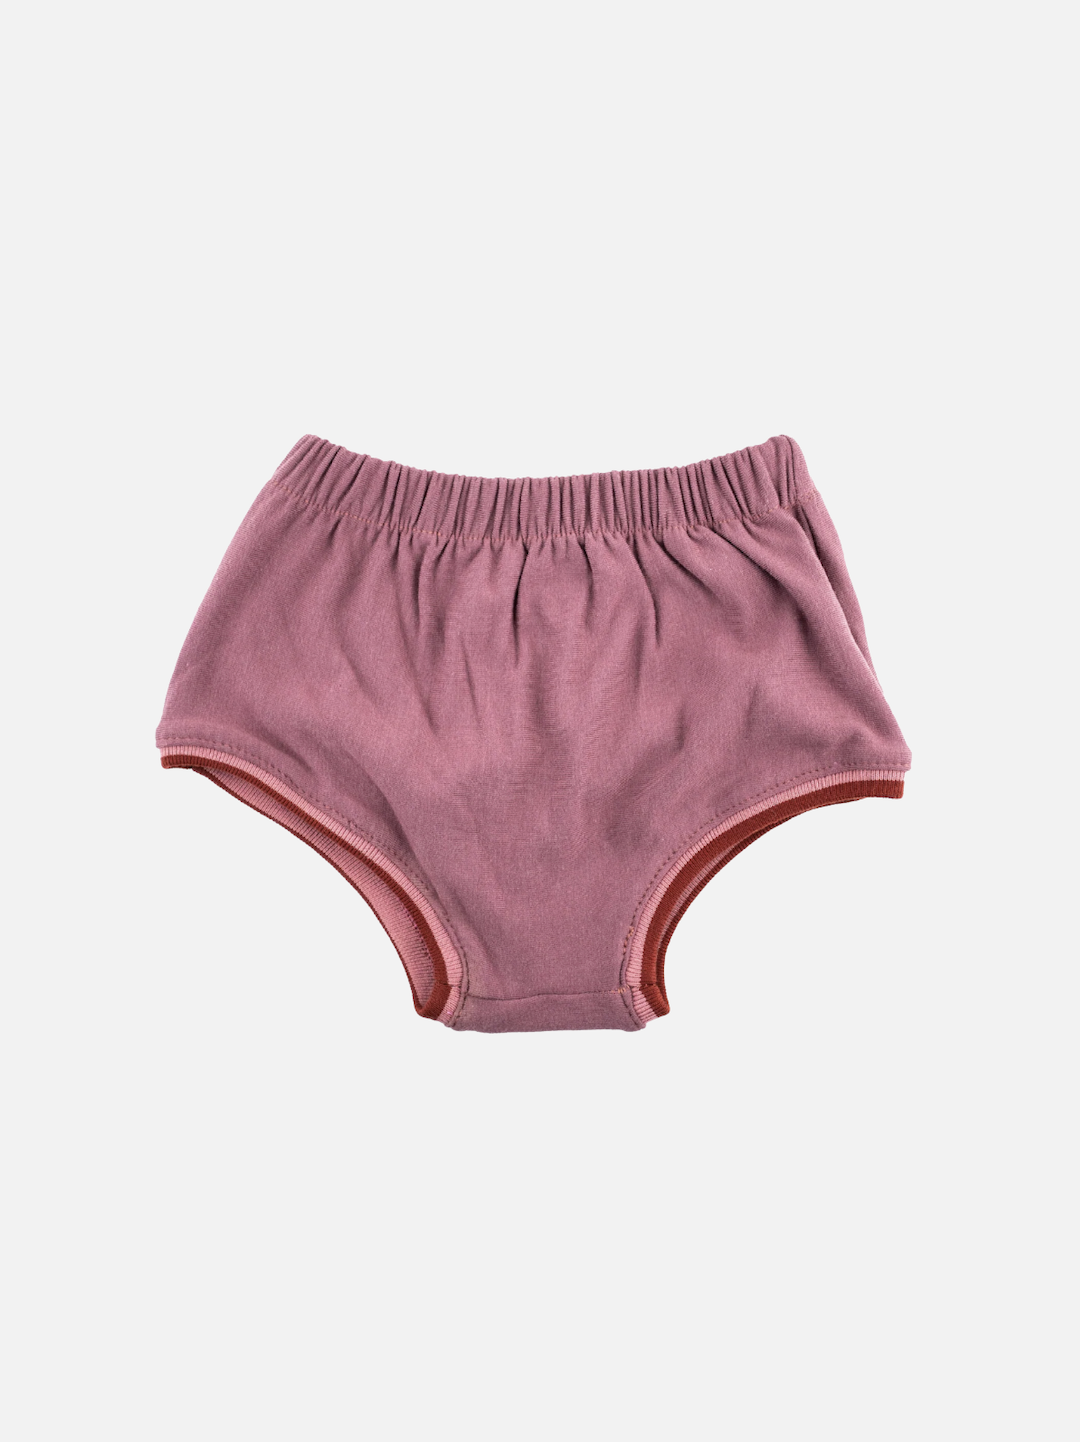 Lilac kids' bloomers, front view